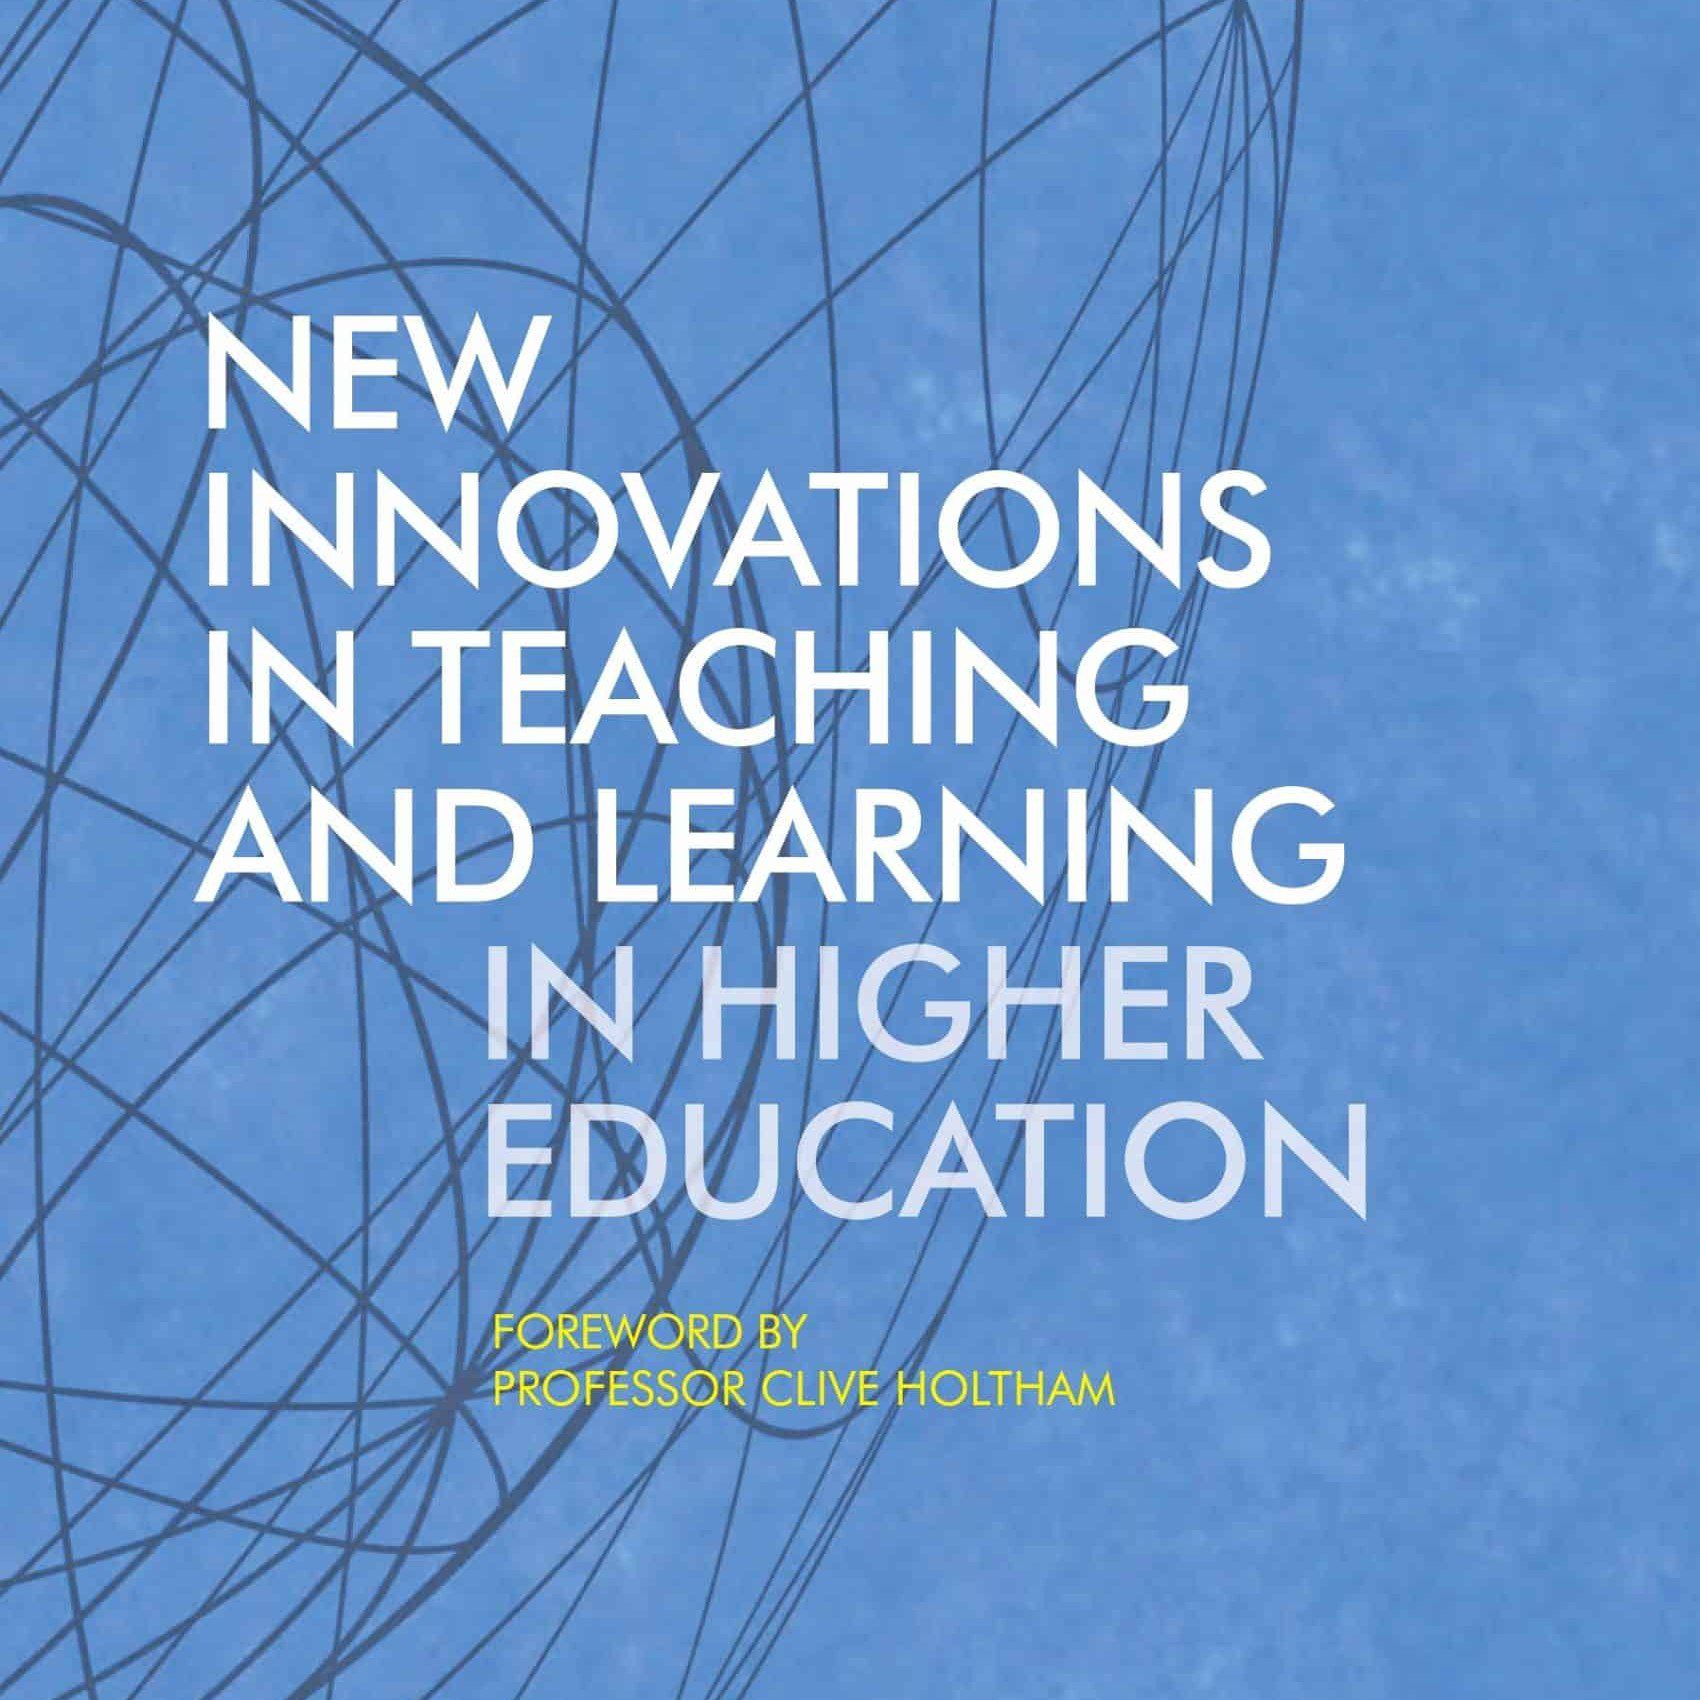 New Innovations in Teaching and Learning in Higher Education (2017) - Anne Hørsted - Paul Bartholomew - John Branch - Claus Nygaard - Clive Holtham - Institute for Learning in Higher Education - Libri Publishing Ltd